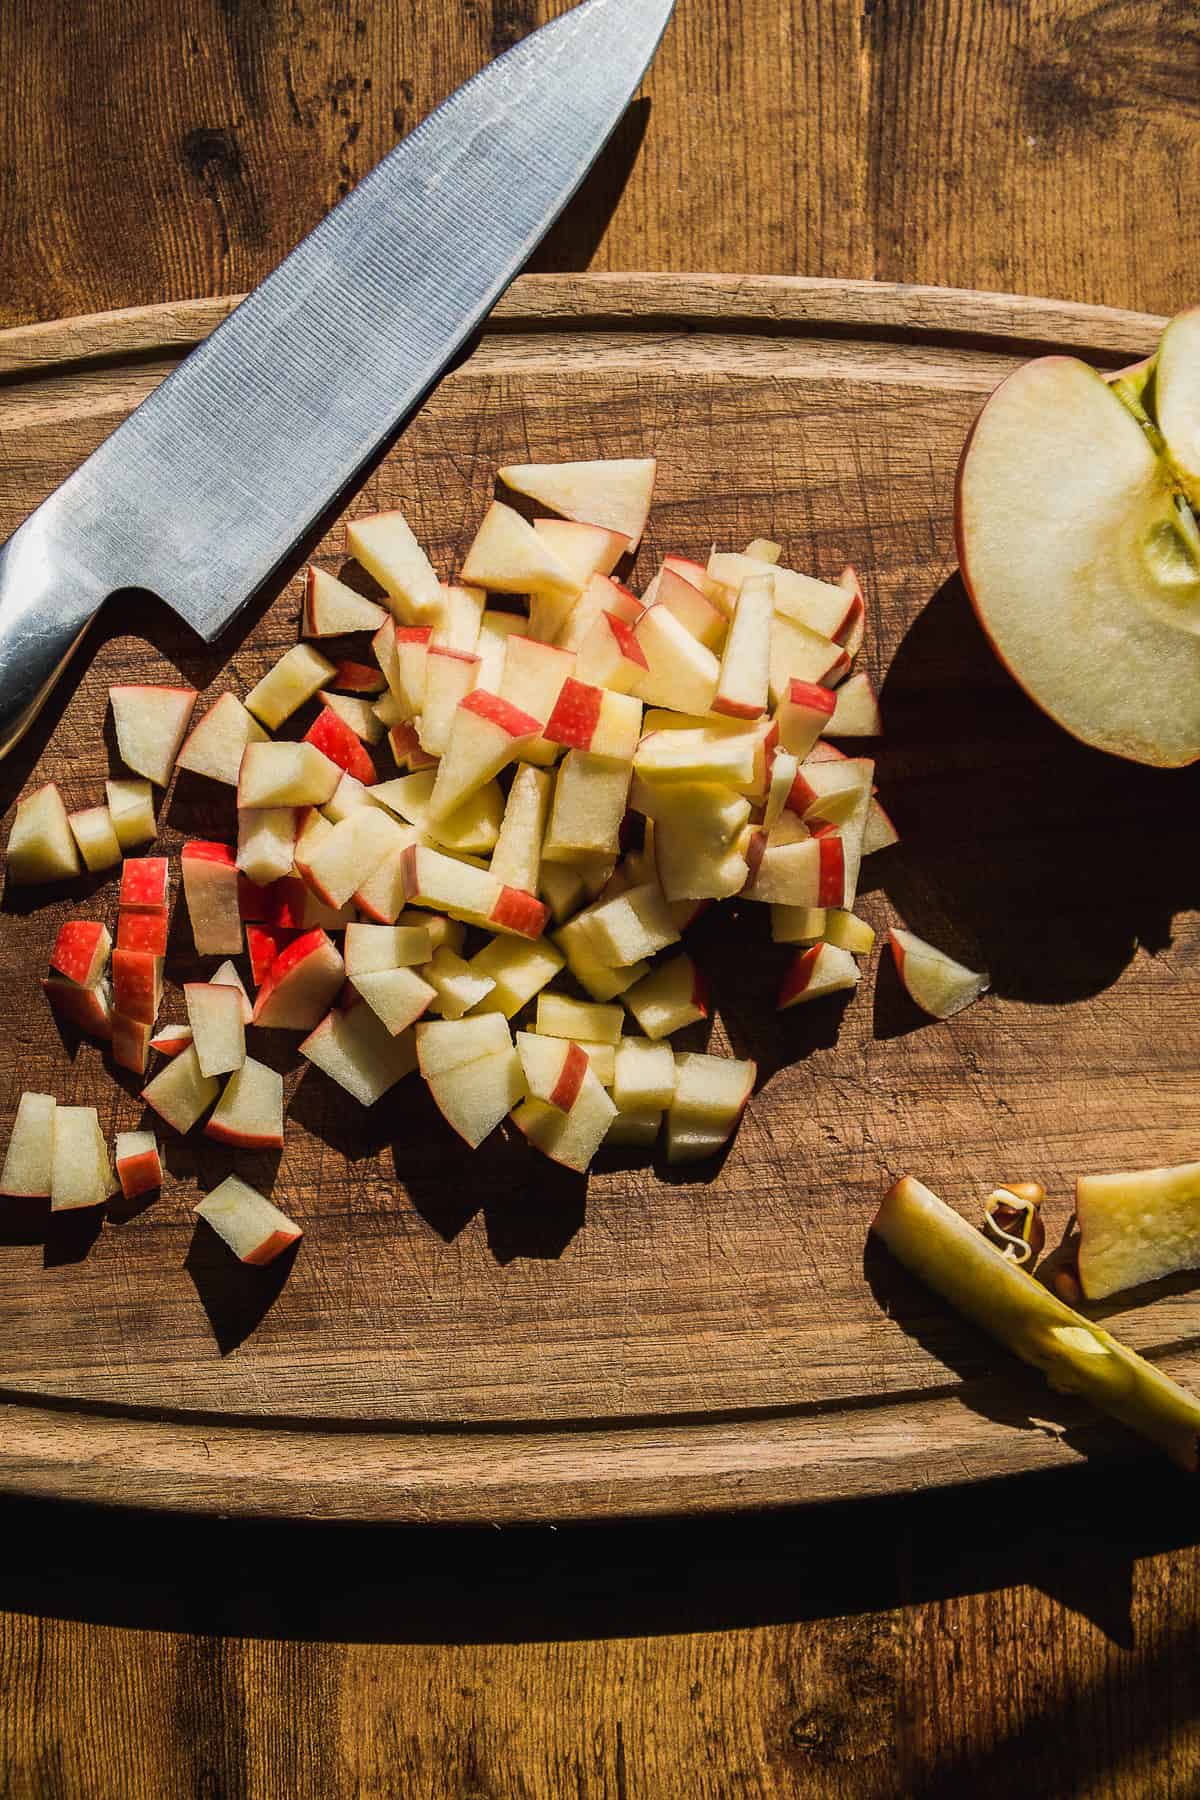 Apples diced into pieces on a wooden cutting board.